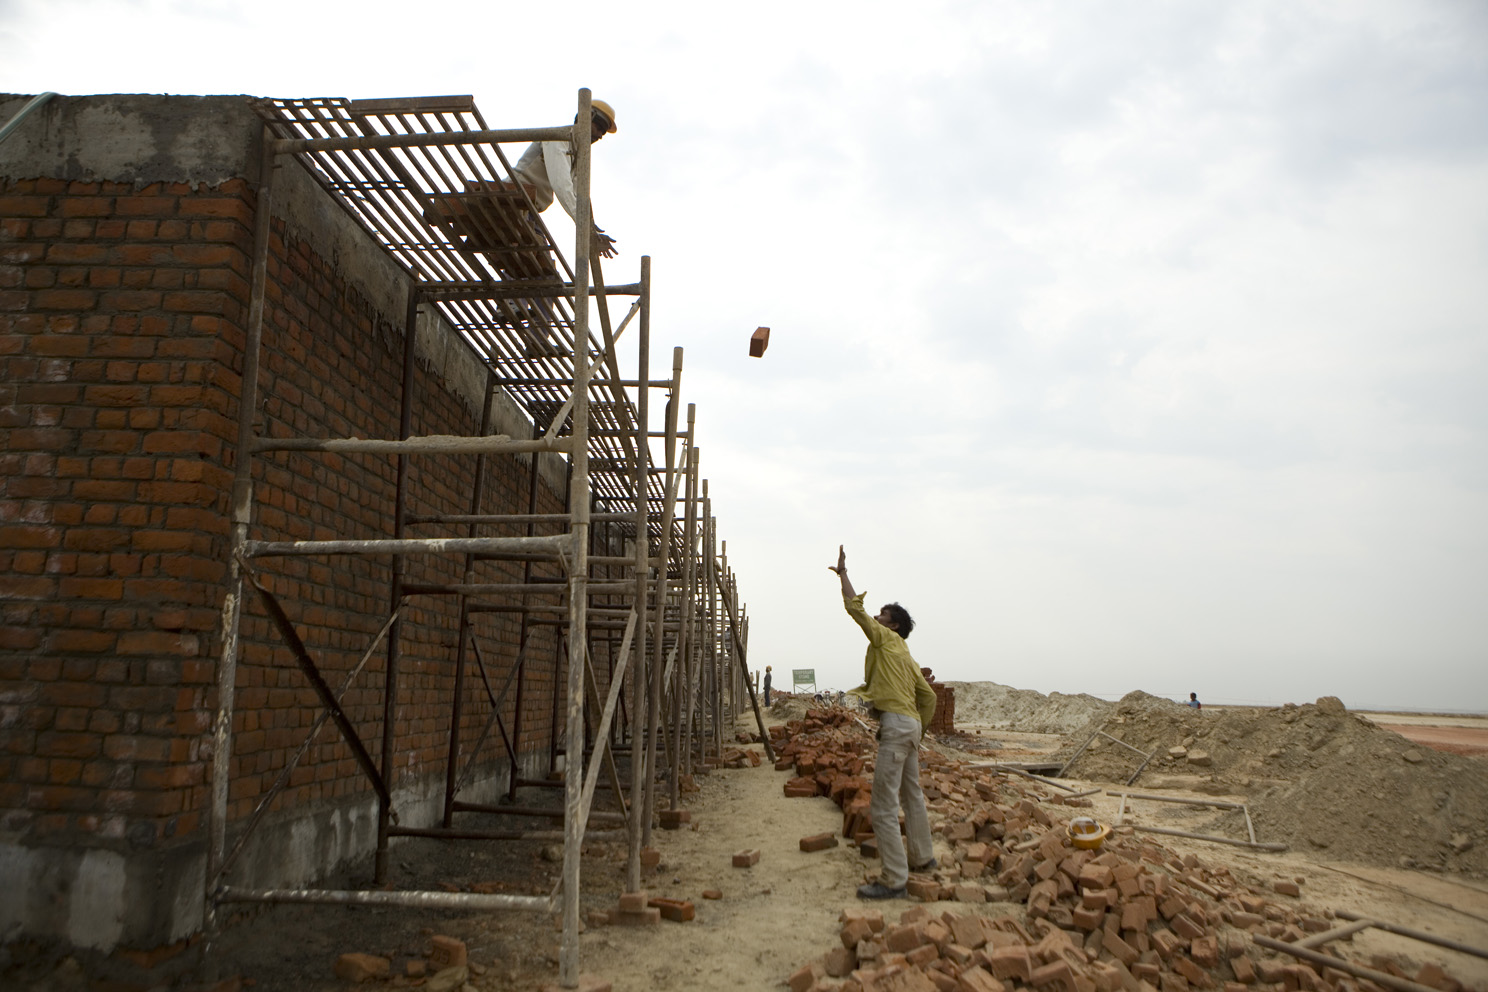 Workers building the Buddh International Circuit